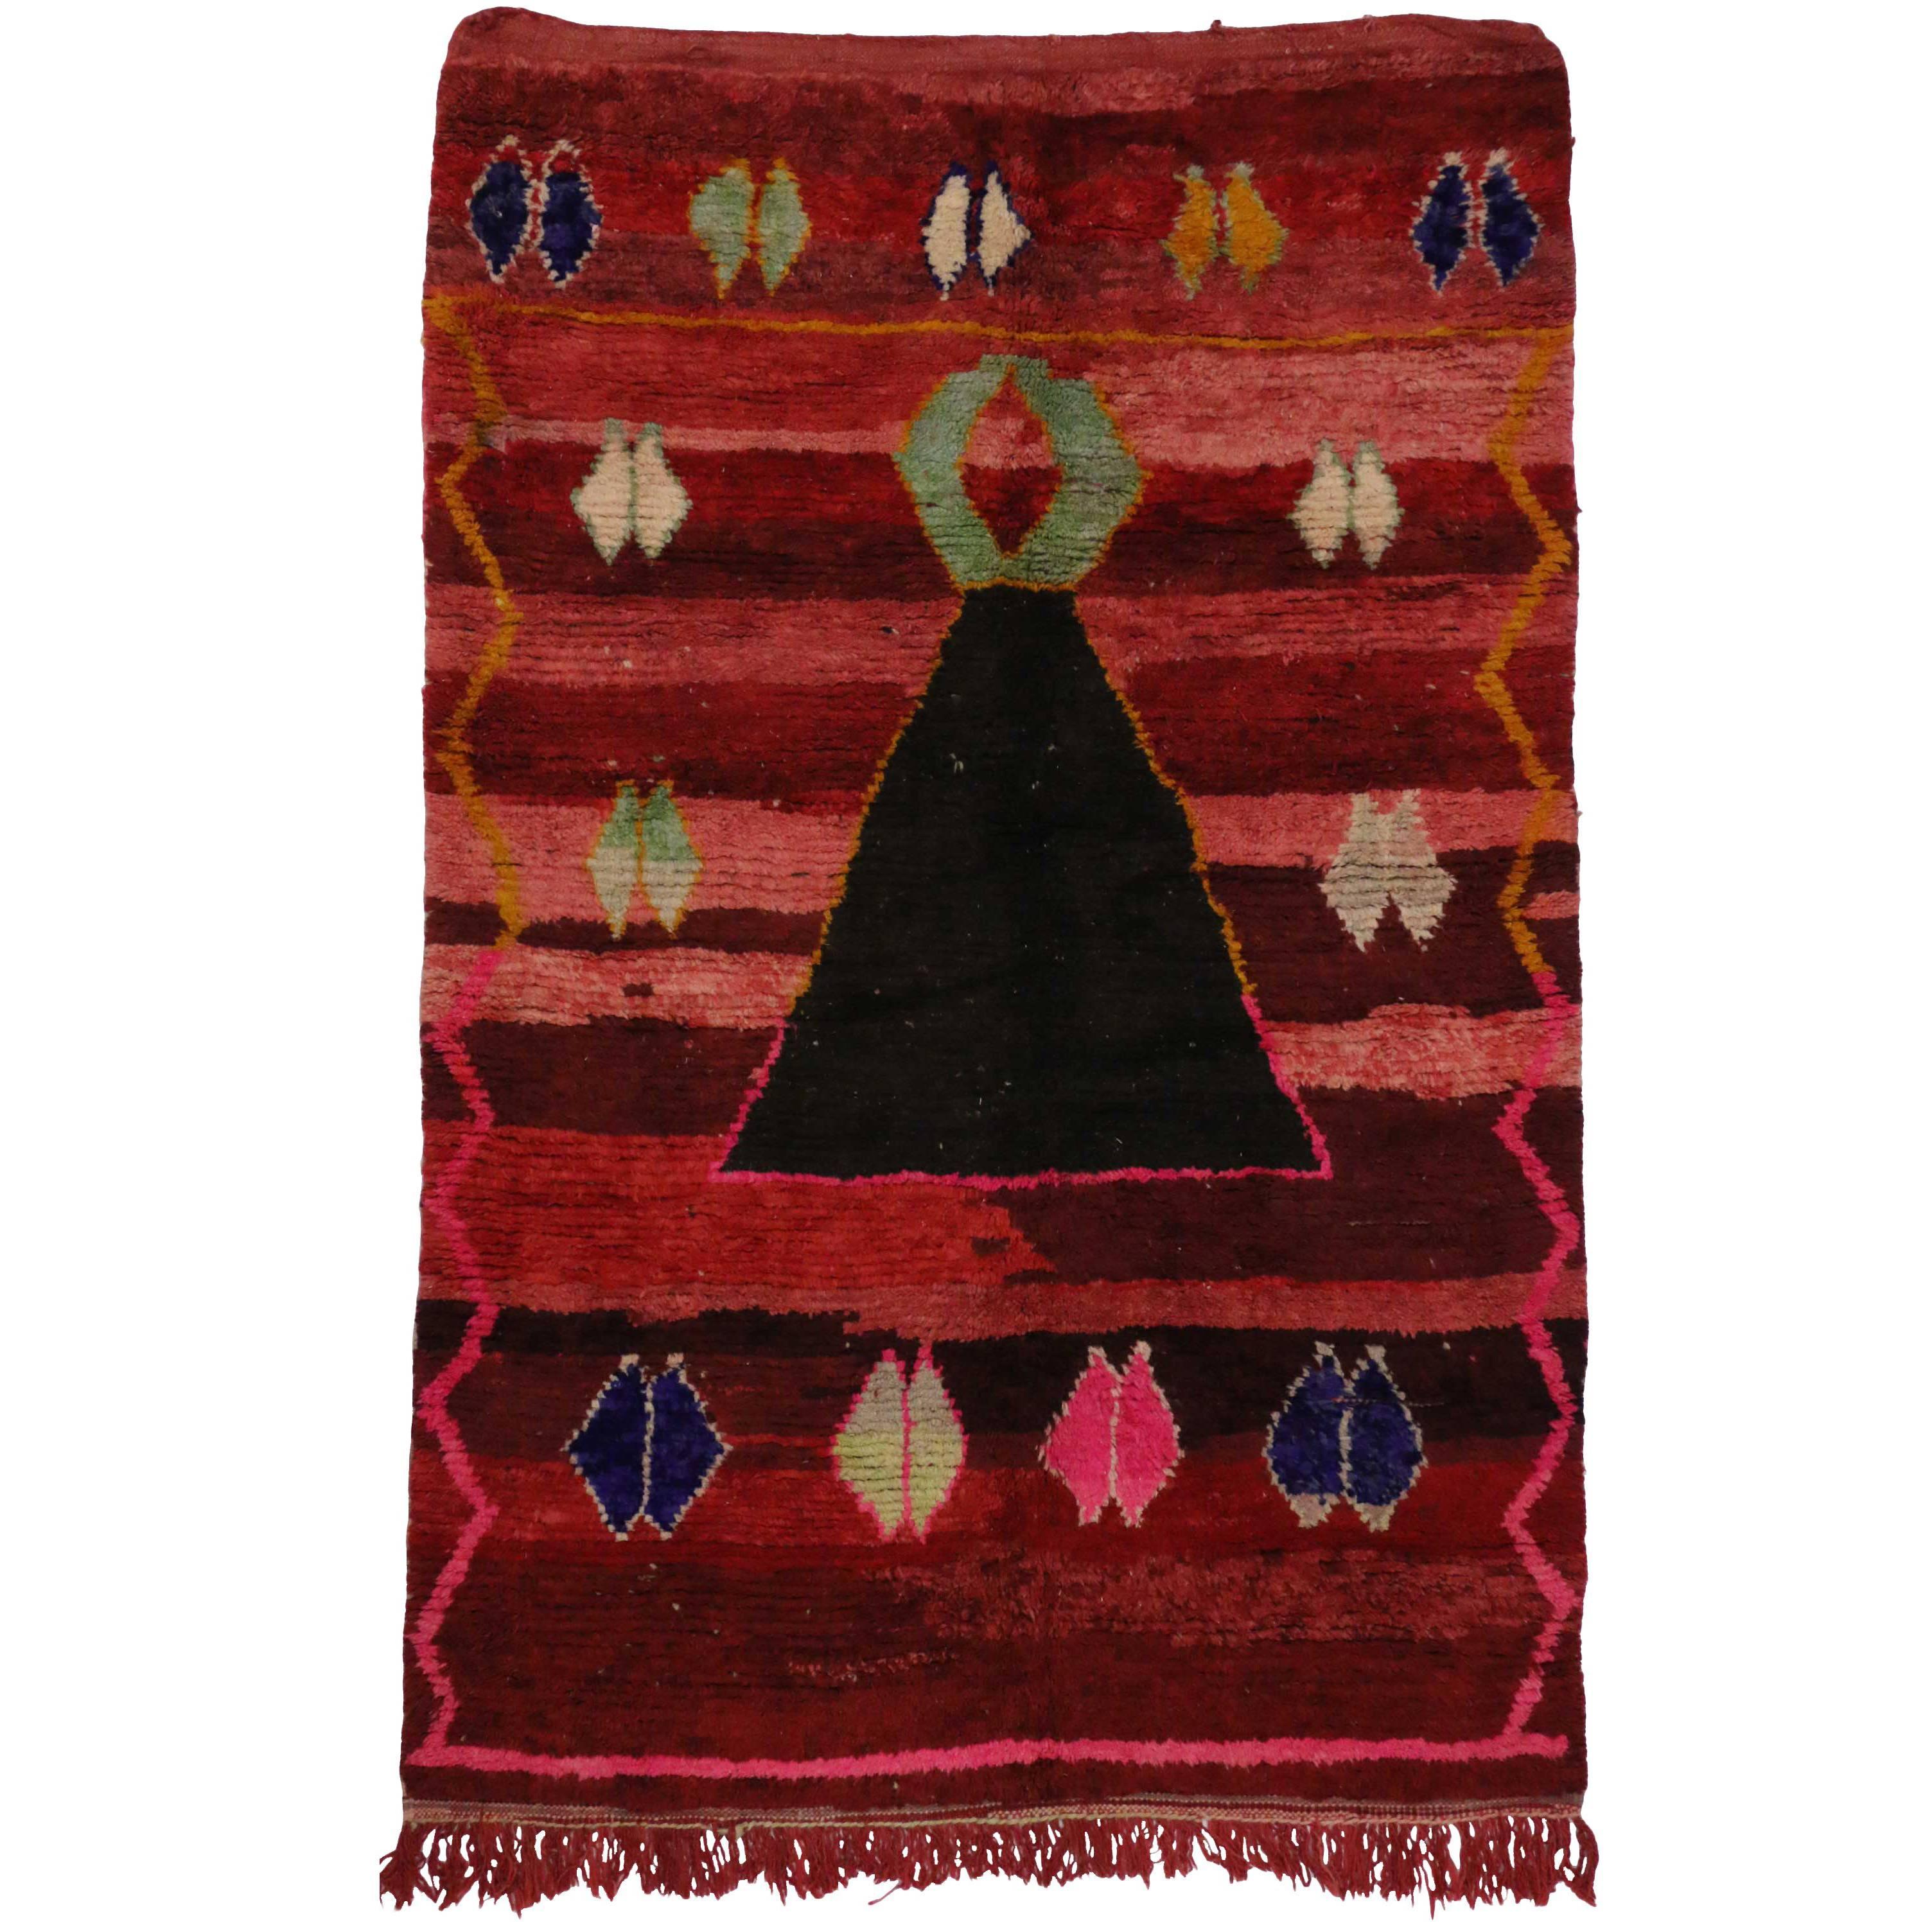 Boho Chic Berber Moroccan Rug with Contemporary Abstract Style